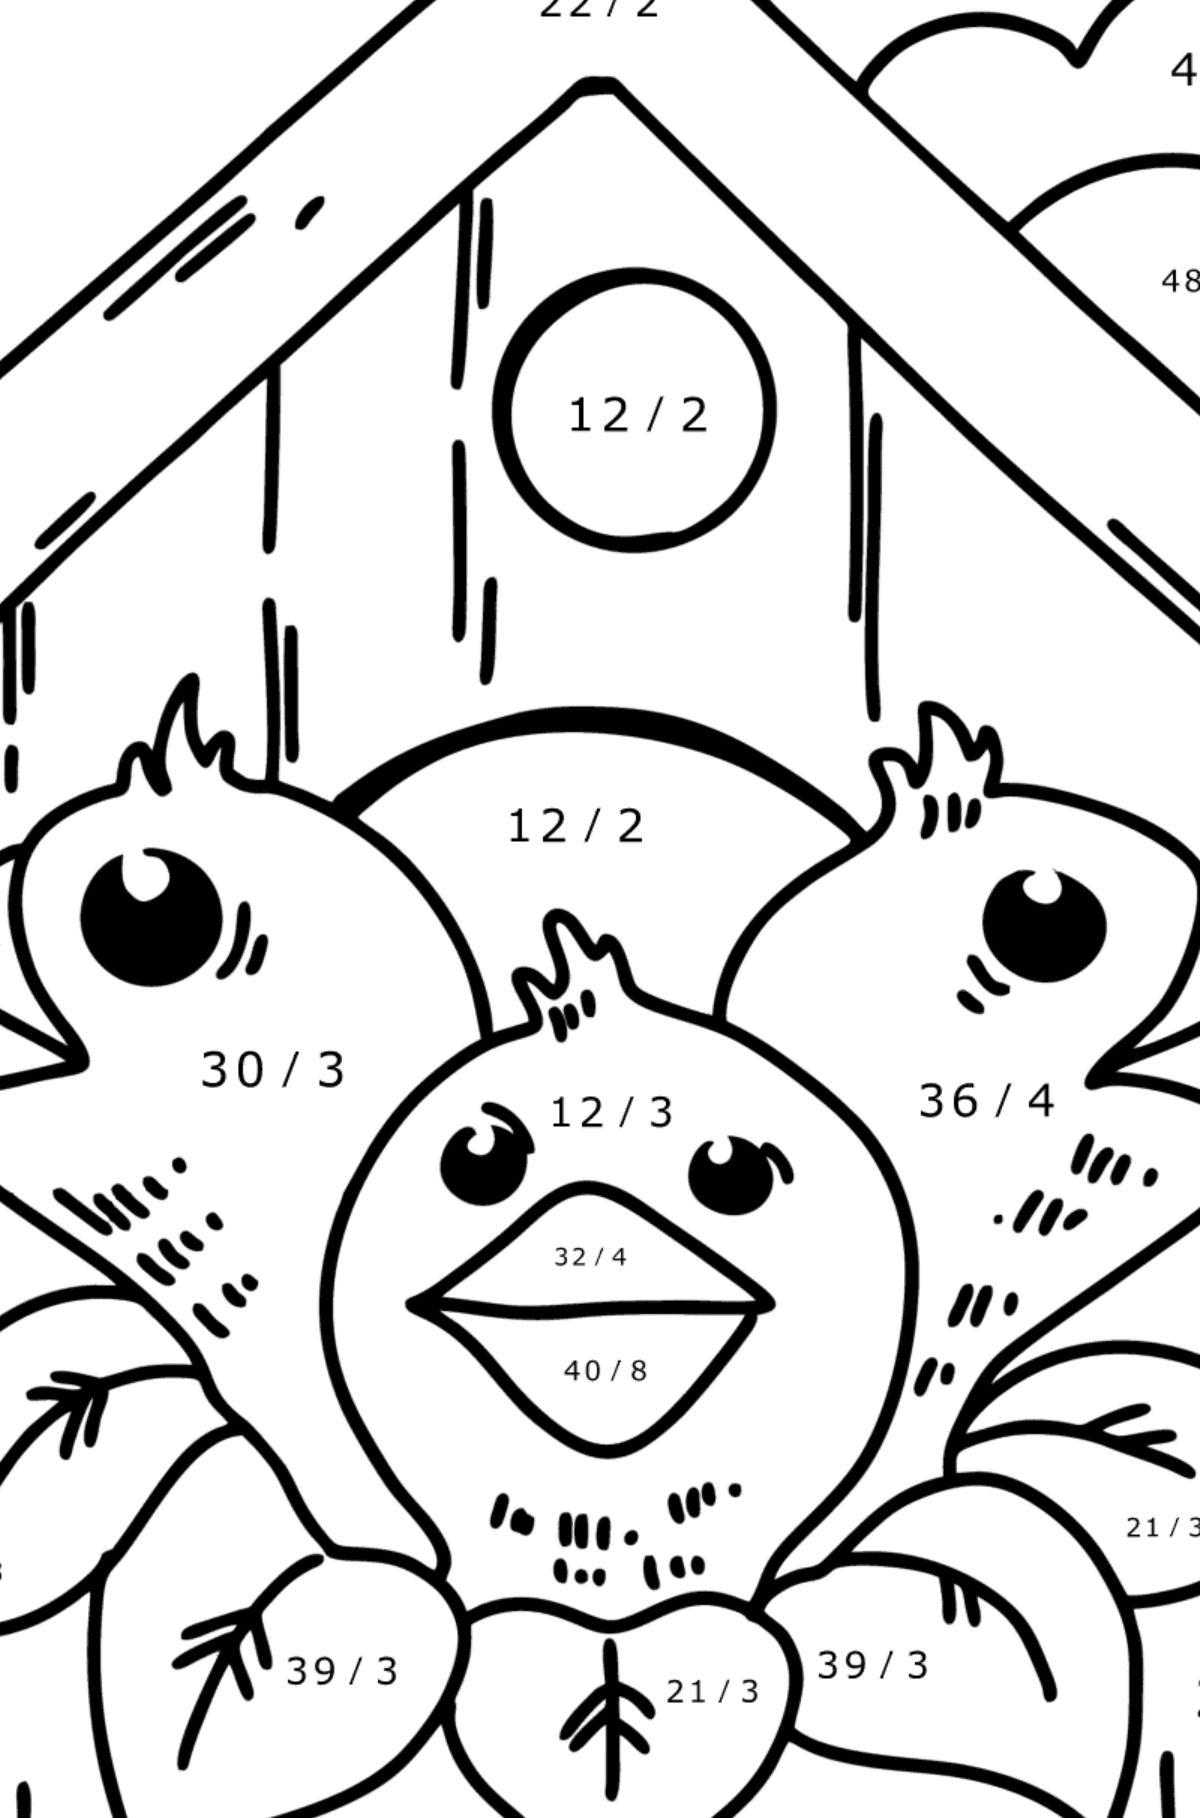 Chicks in a Birdhouse coloring page - Math Coloring - Division for Kids